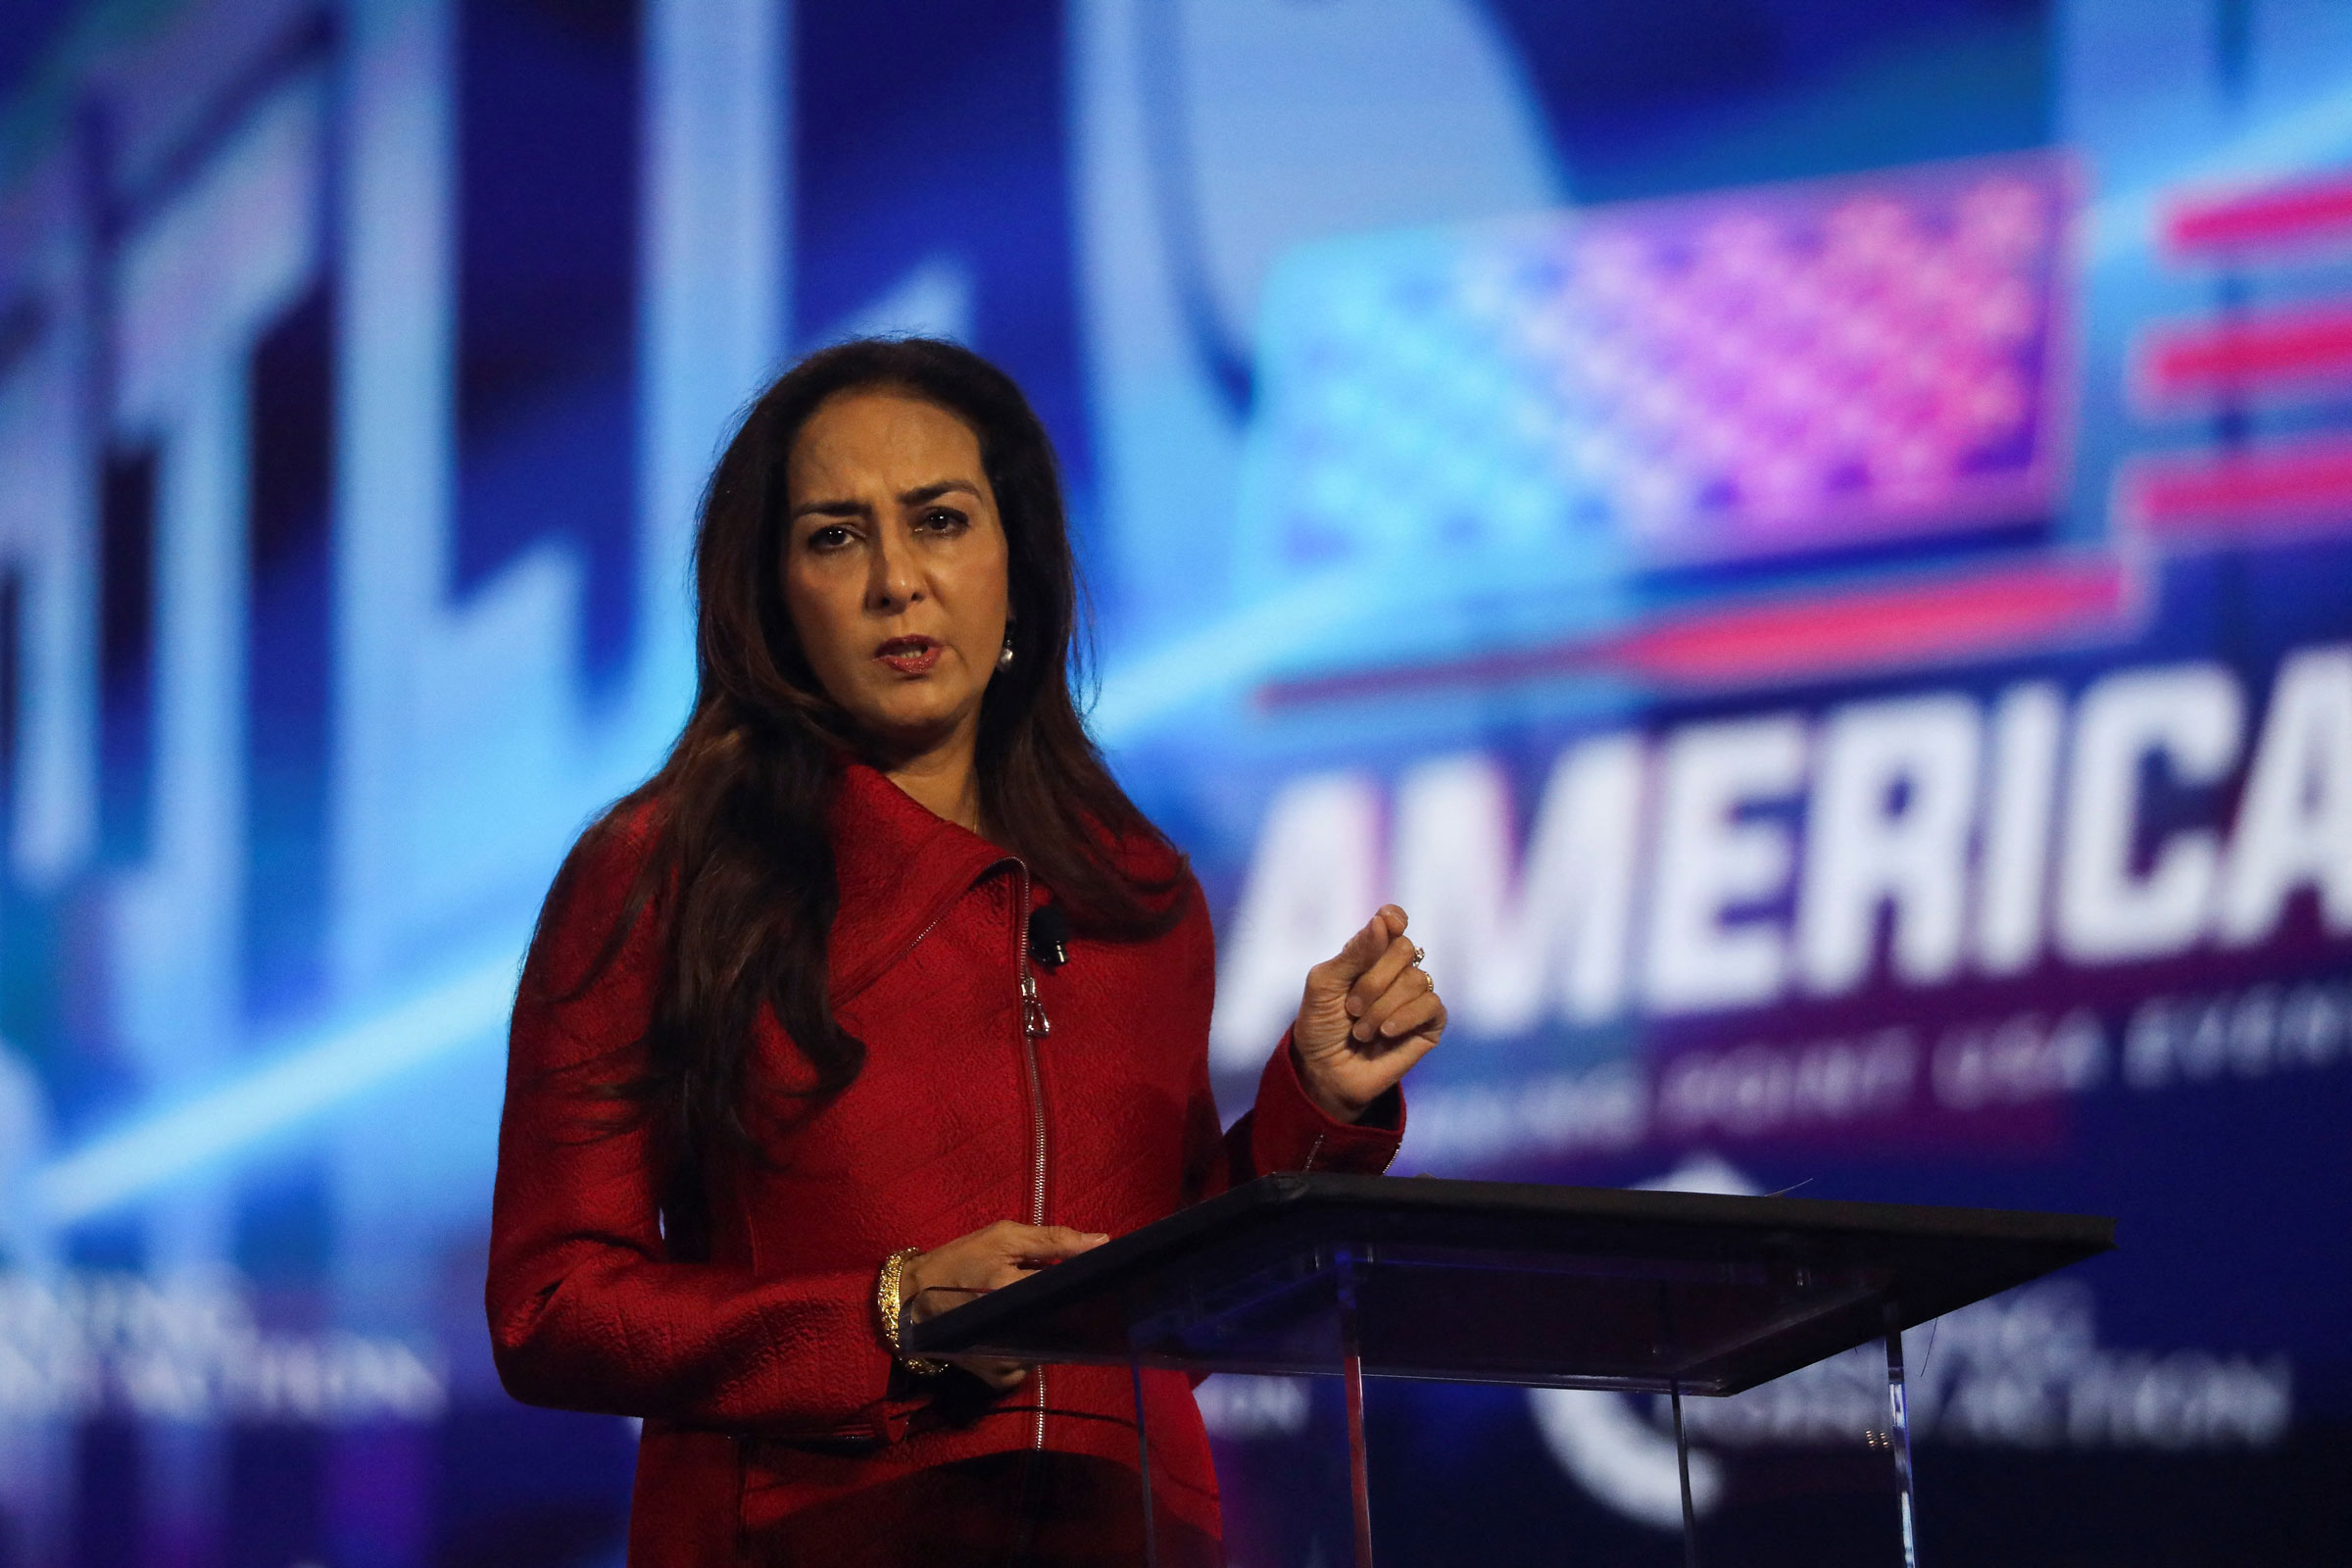 Harmeet Dhillon, a candidate for chairperson of the Republican National Committee, speaks during a right-wing gathering known as America Fest